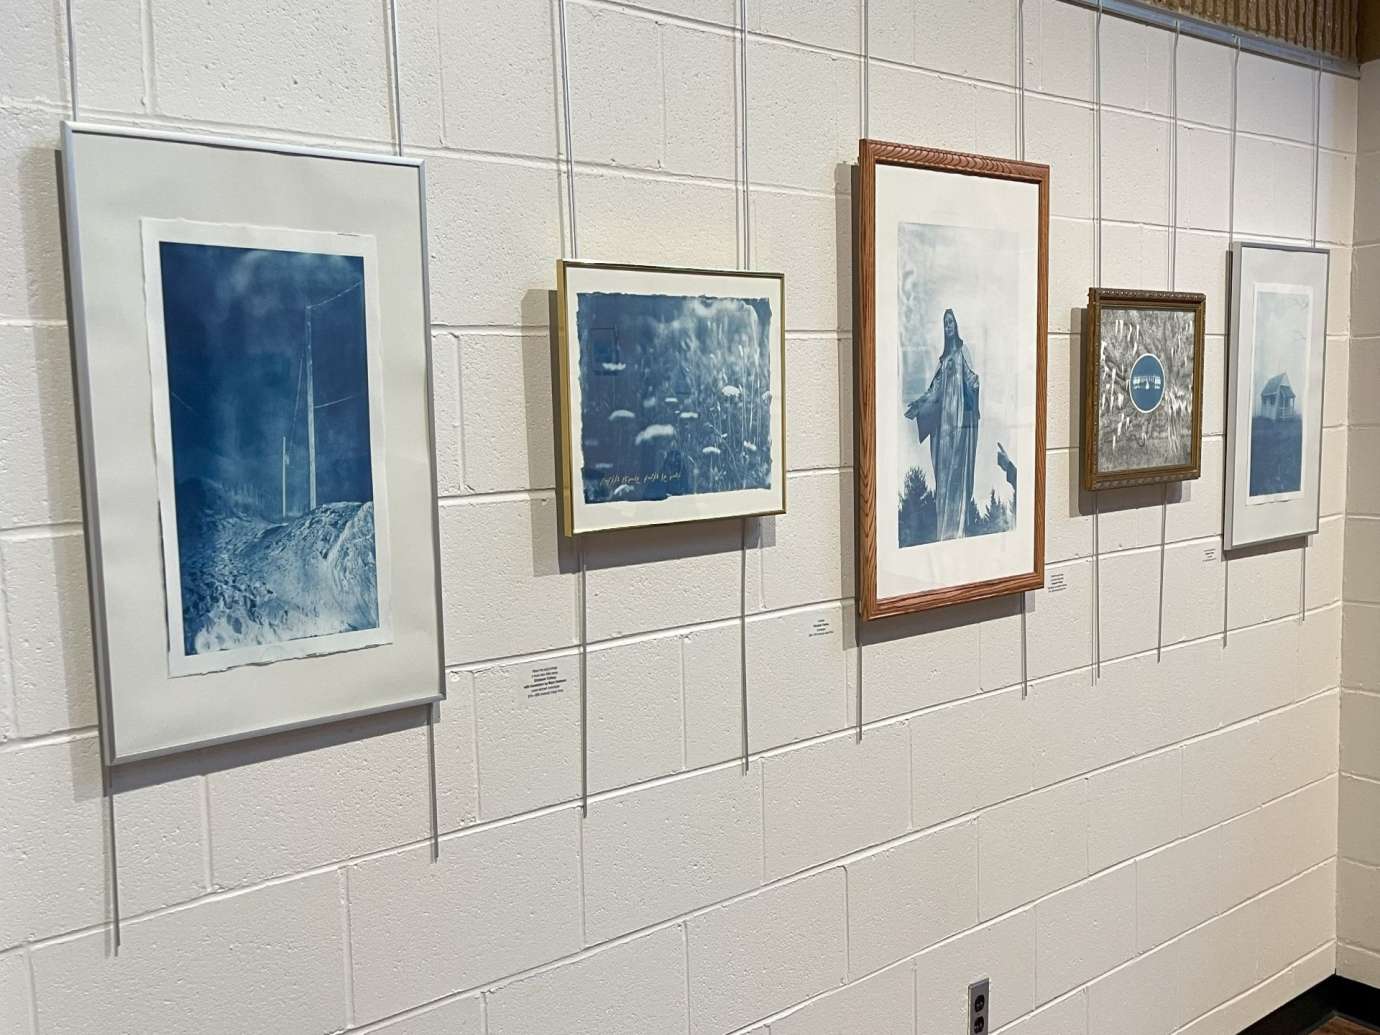 Five framed artworks with blue and white images on a gallery wall